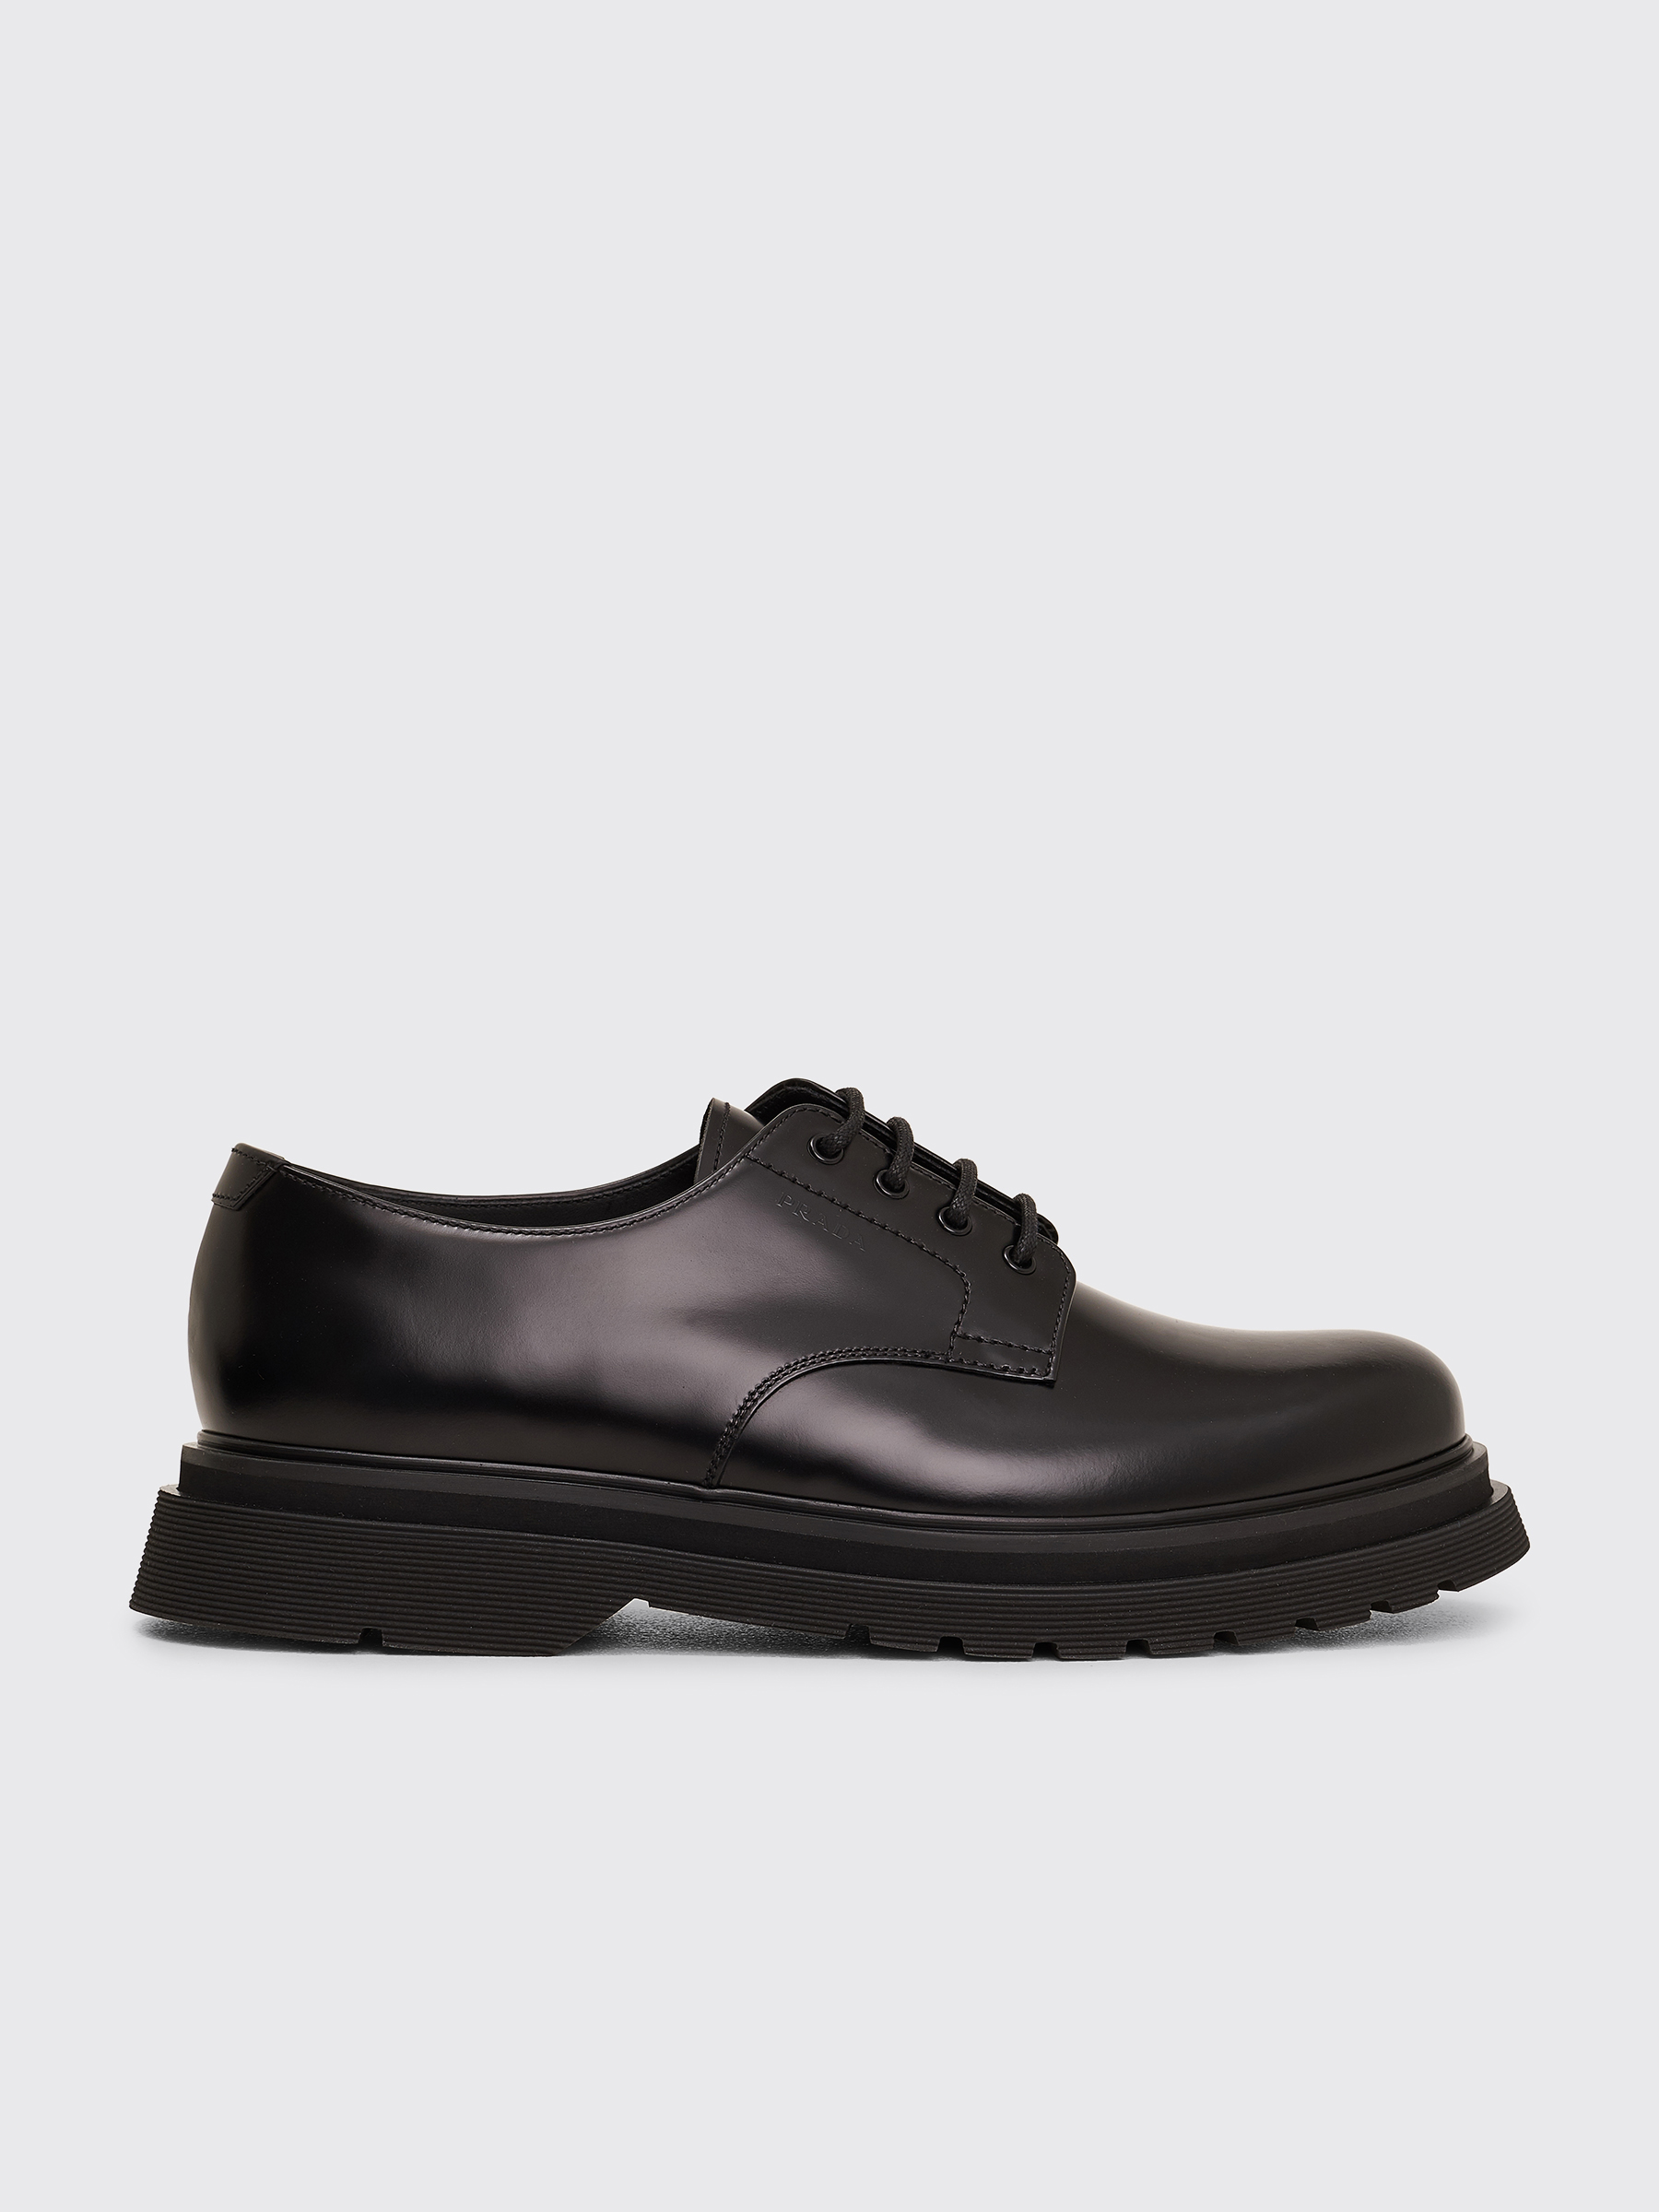 Prada Leather Lace Up Derby Shoes Black